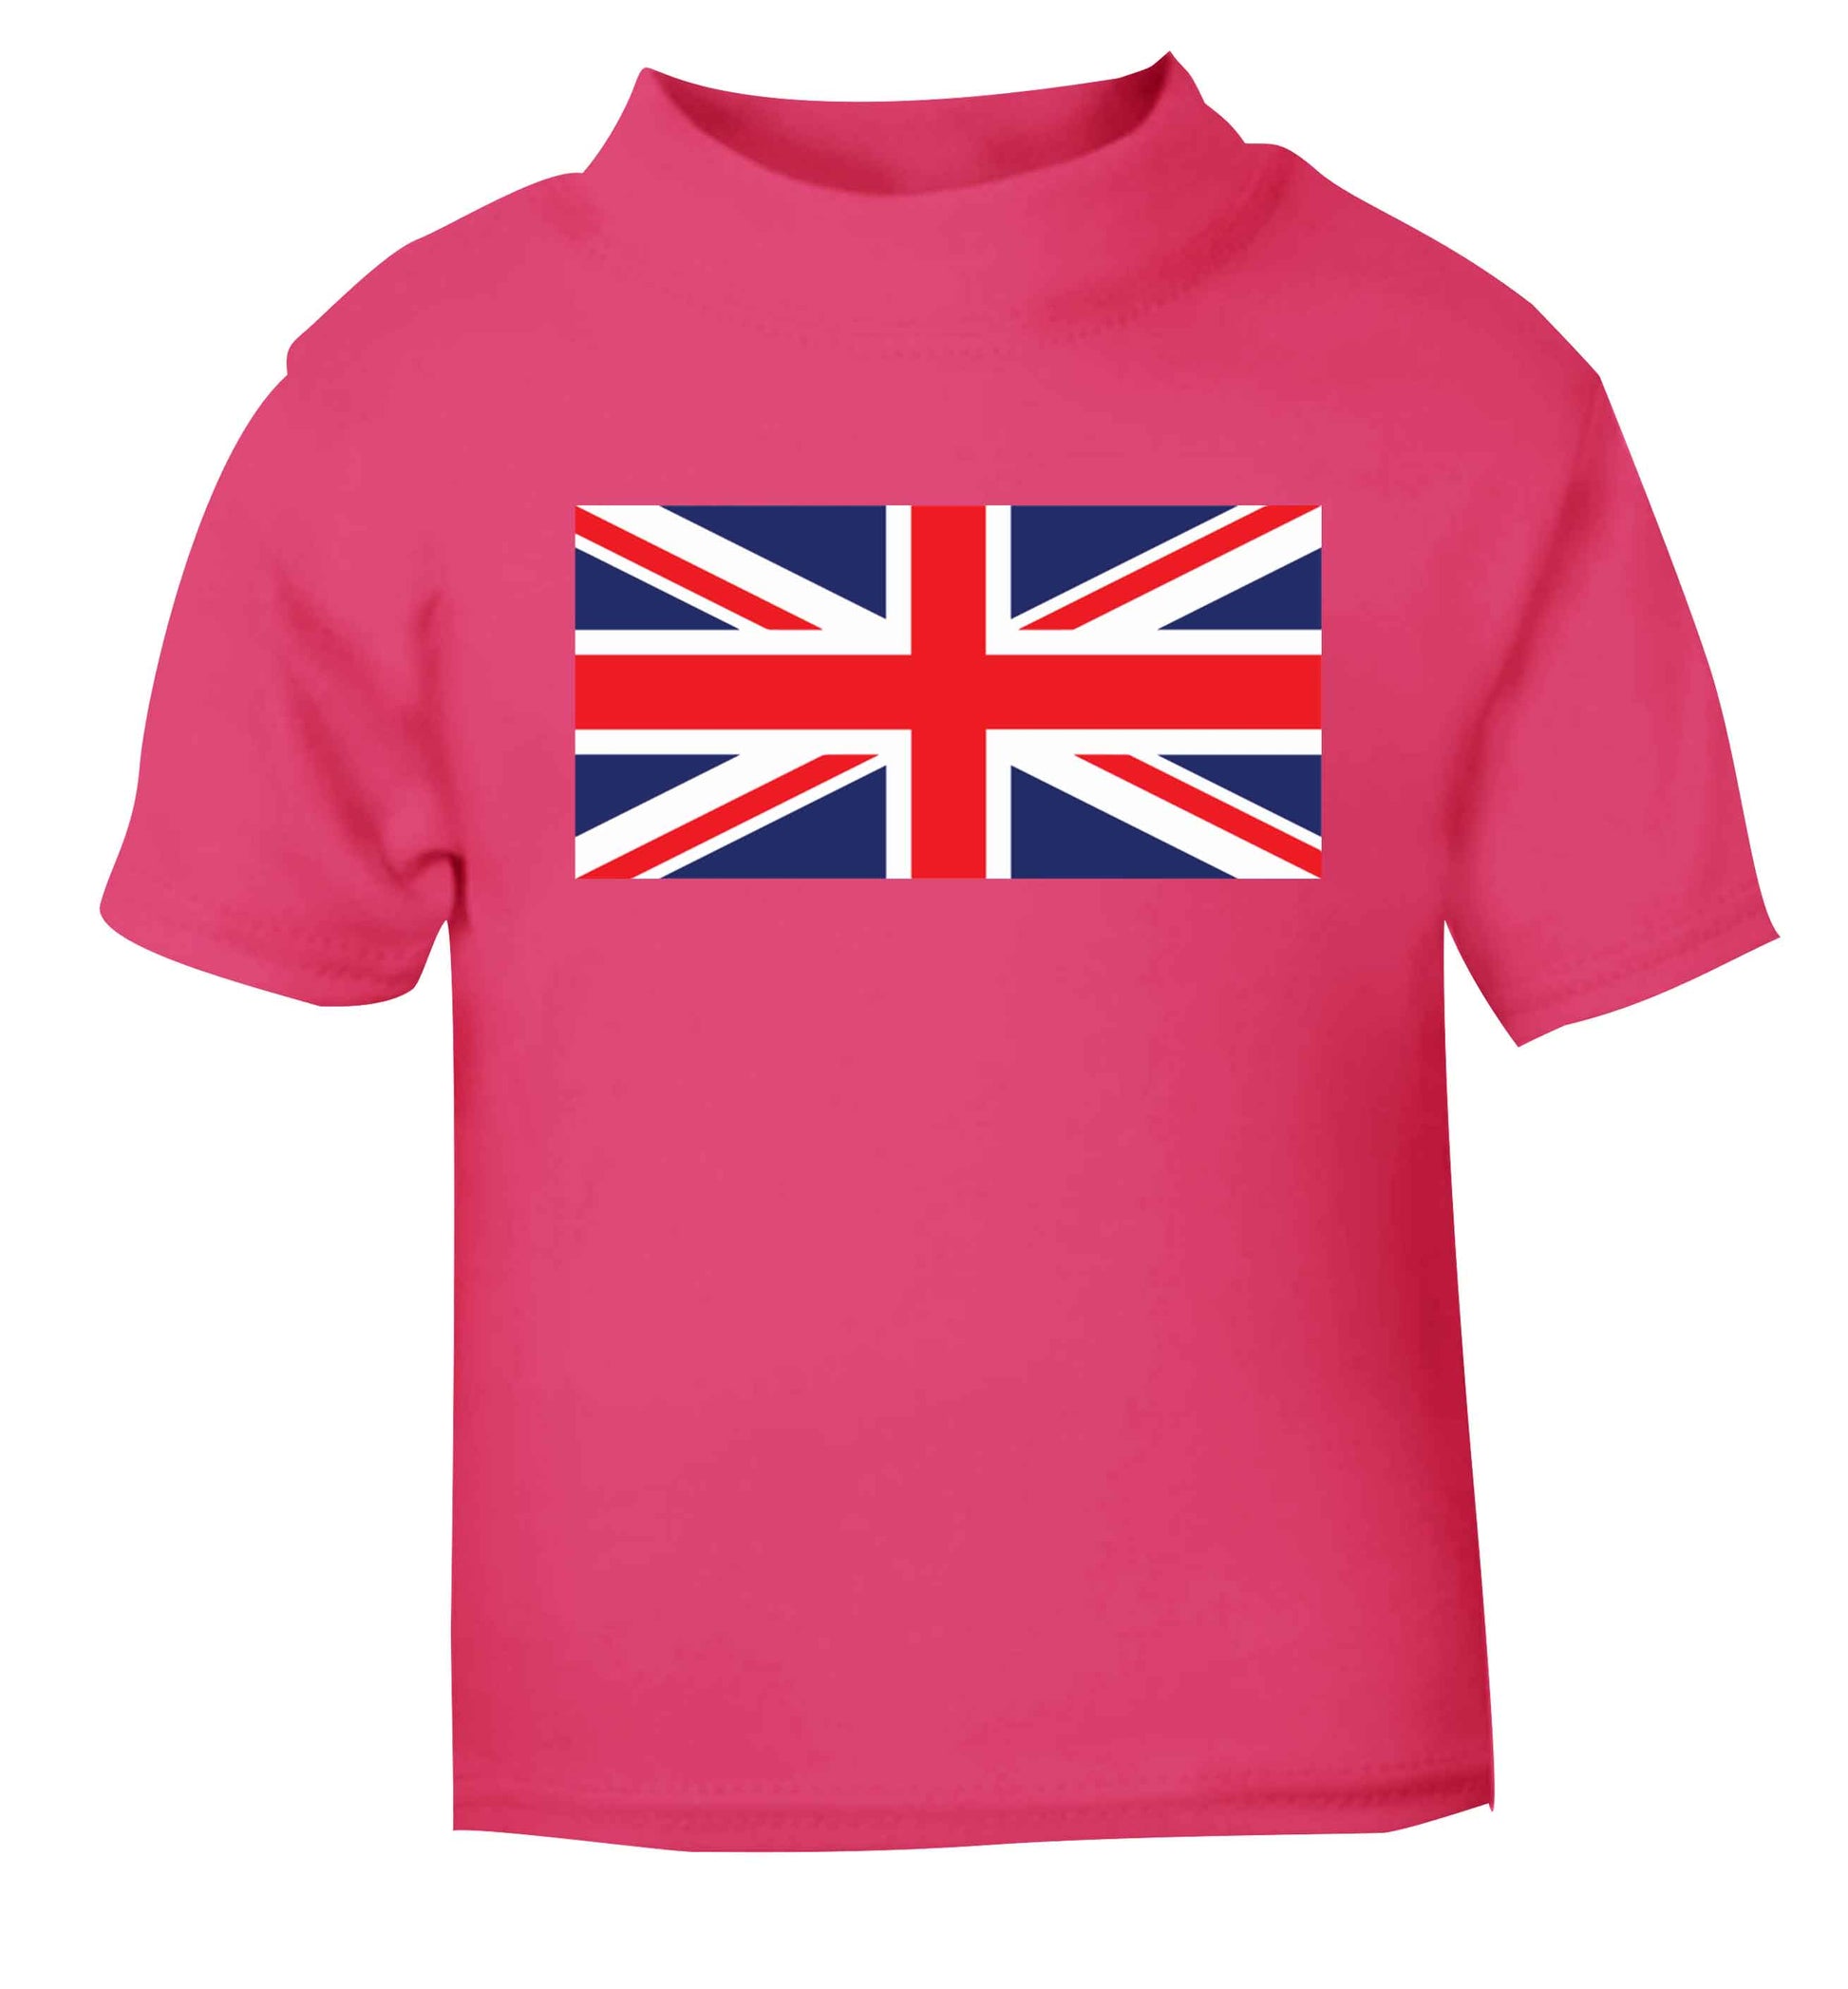 Union Jack pink baby toddler Tshirt 2 Years